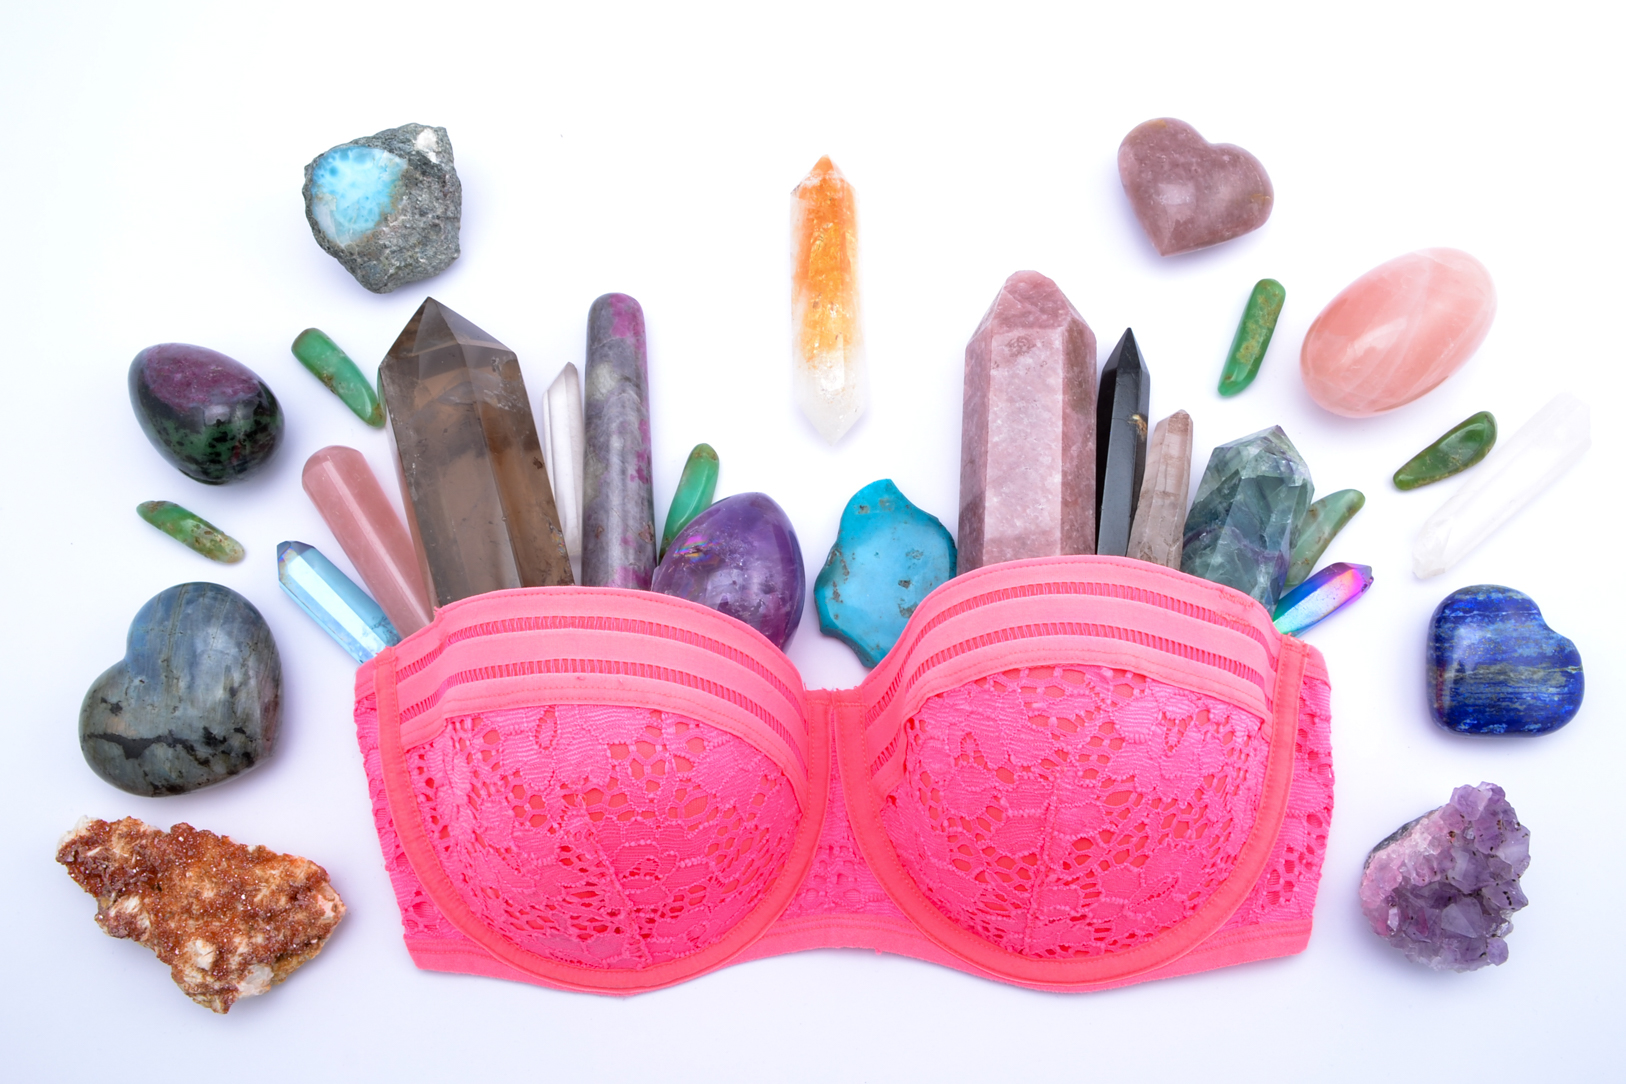 WHAT CRYSTALS ARE IN YOUR BRA? - Earth Crystals